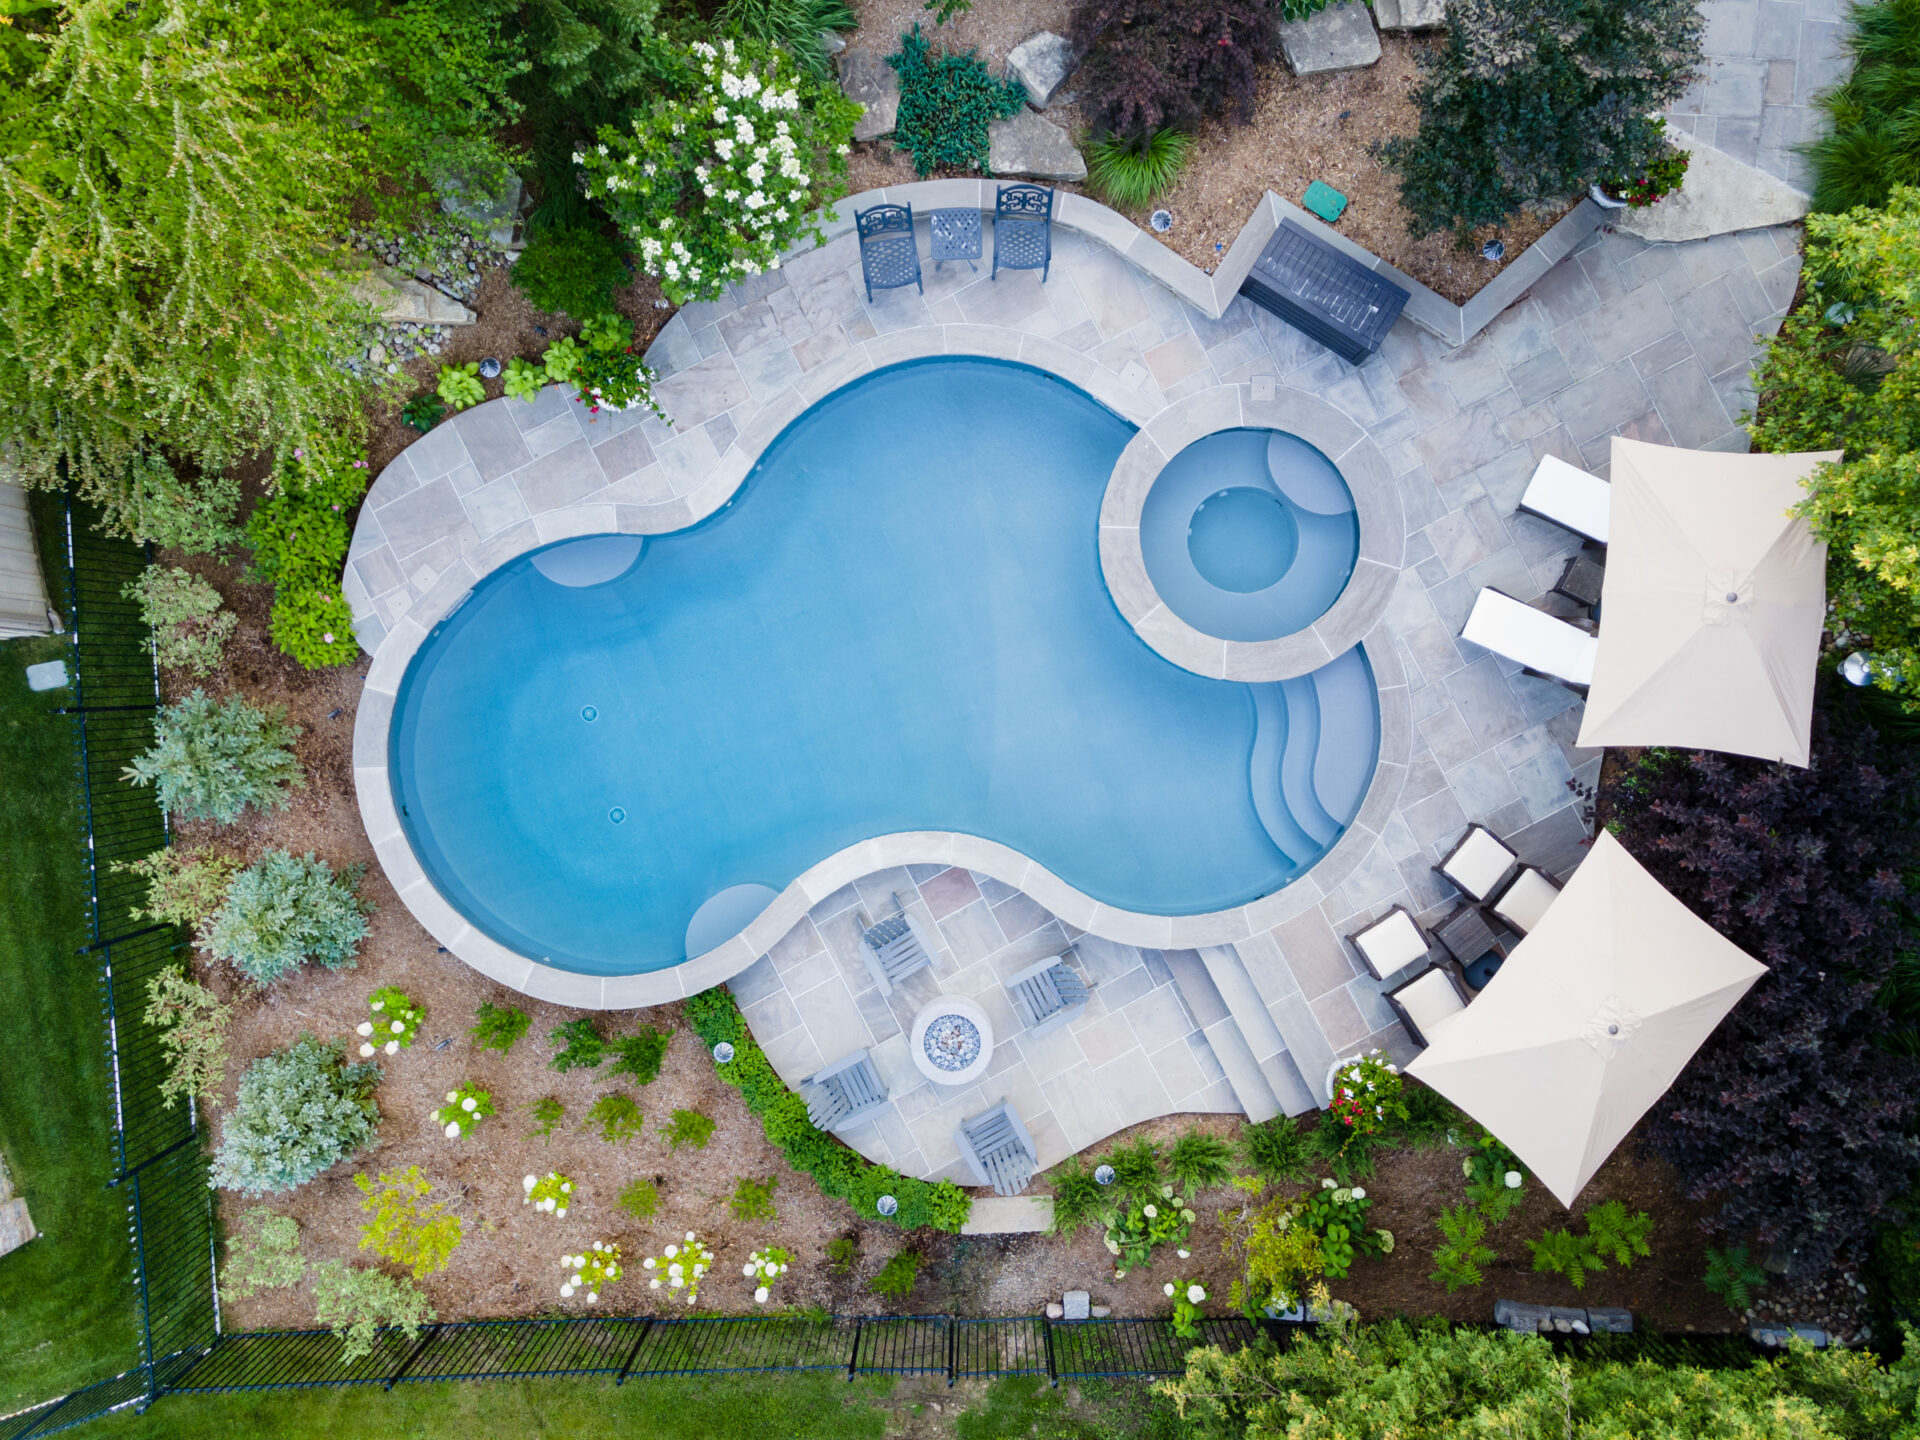 Aerial view of a backyard with a uniquely shaped swimming pool, surrounded by patio furniture, landscaping, umbrellas, and a neatly manicured lawn.